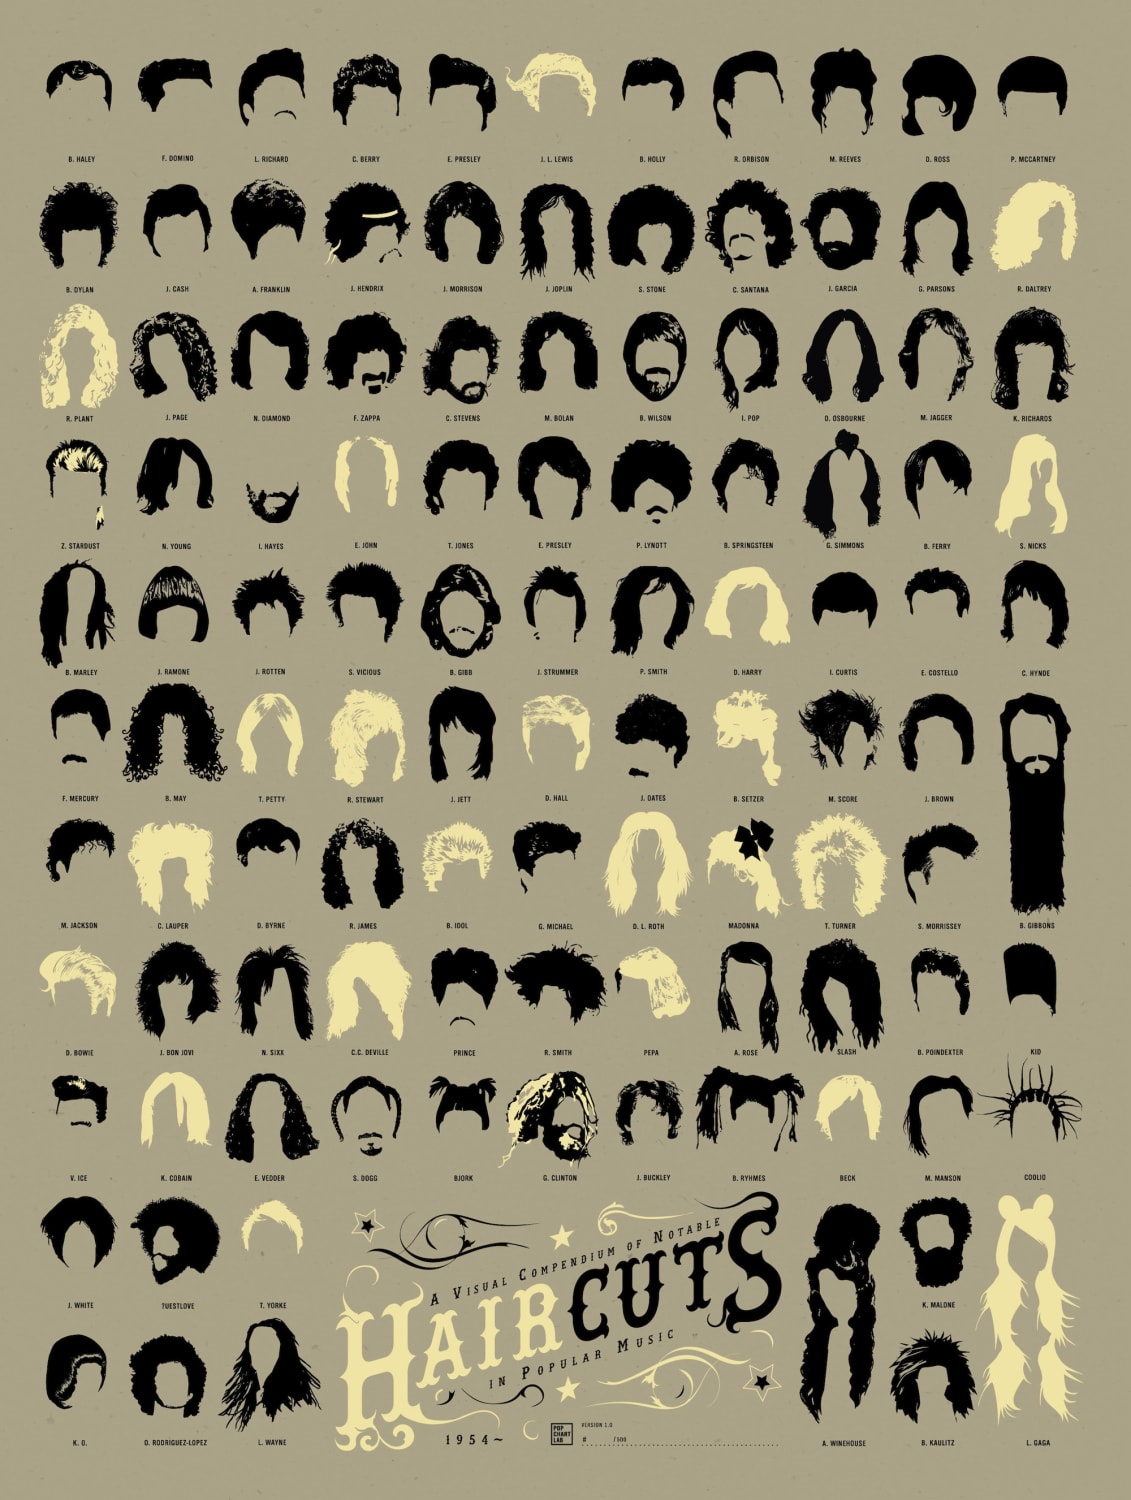 http://images.fastcompany.com/upload/Music-Hair-Cuts-Infographic-Full.jpg